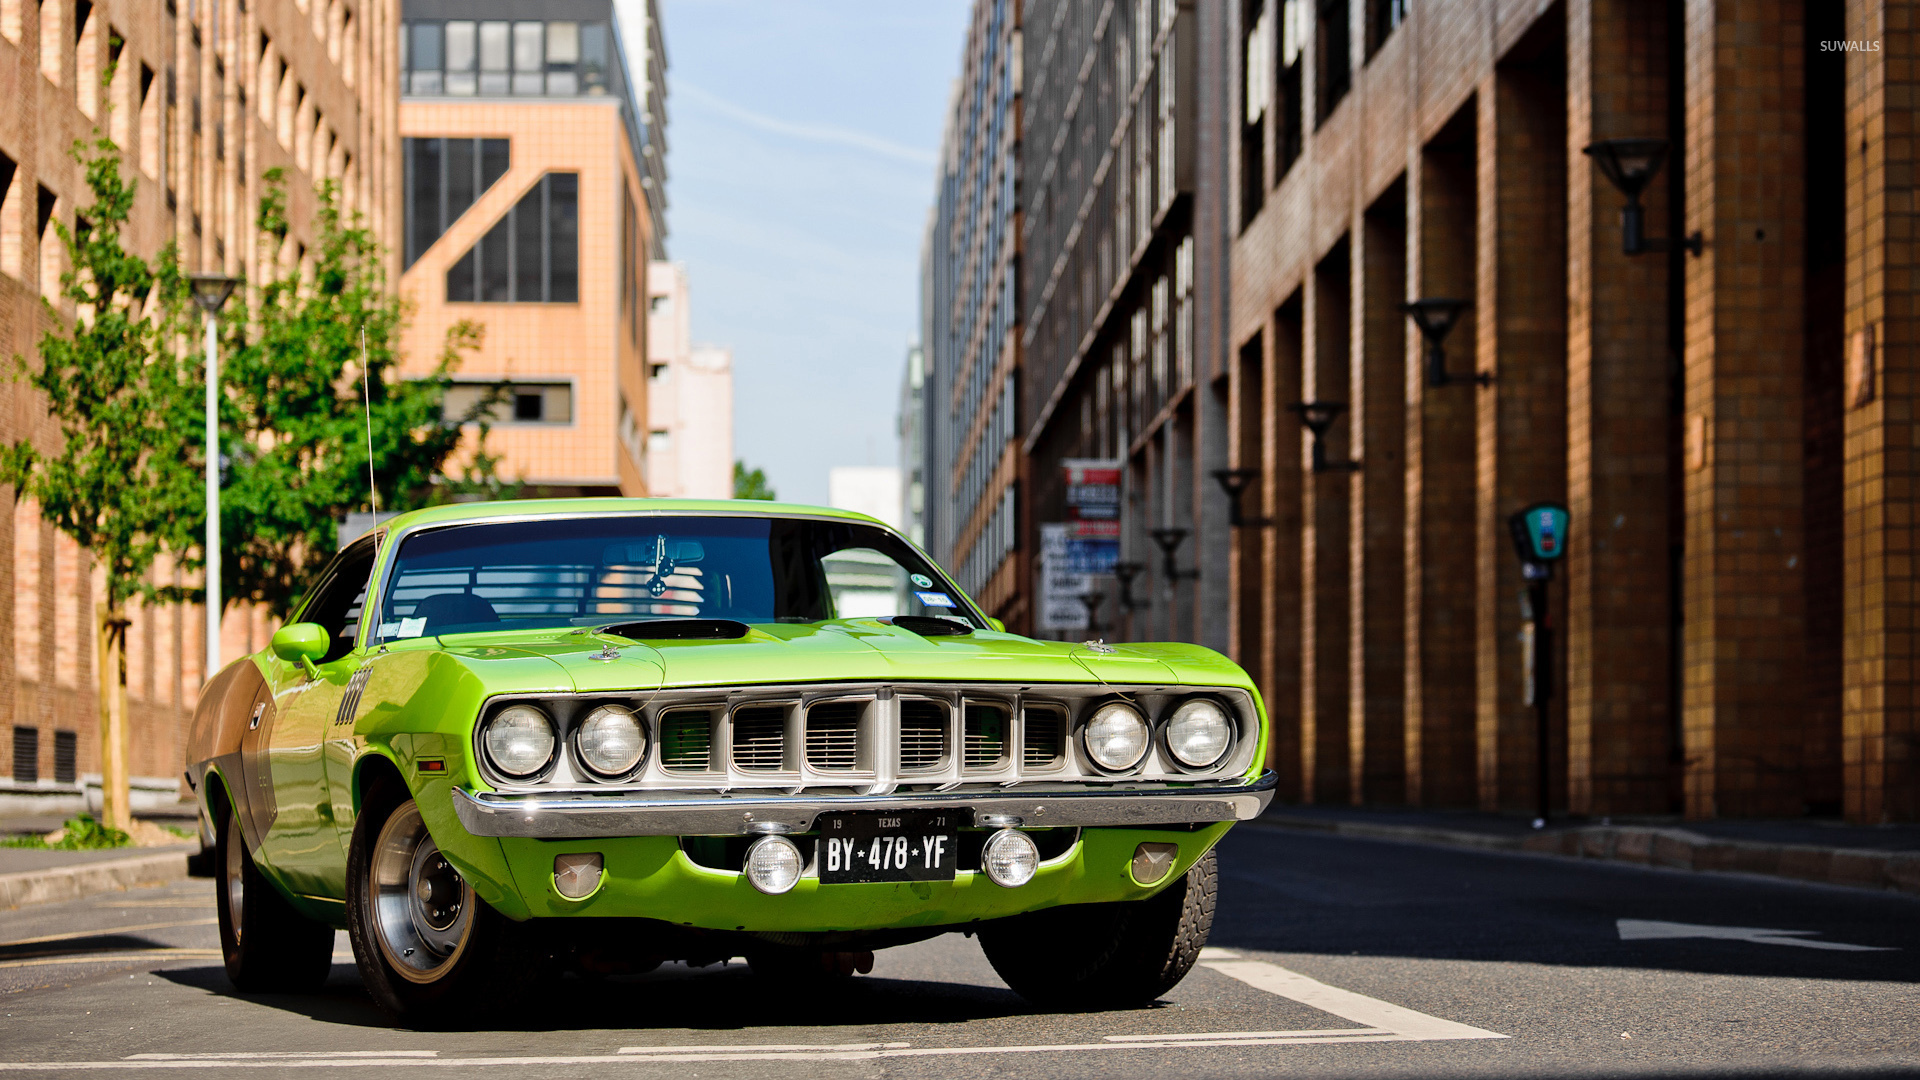 Plymouth Barracuda in the city wallpaper wallpaper